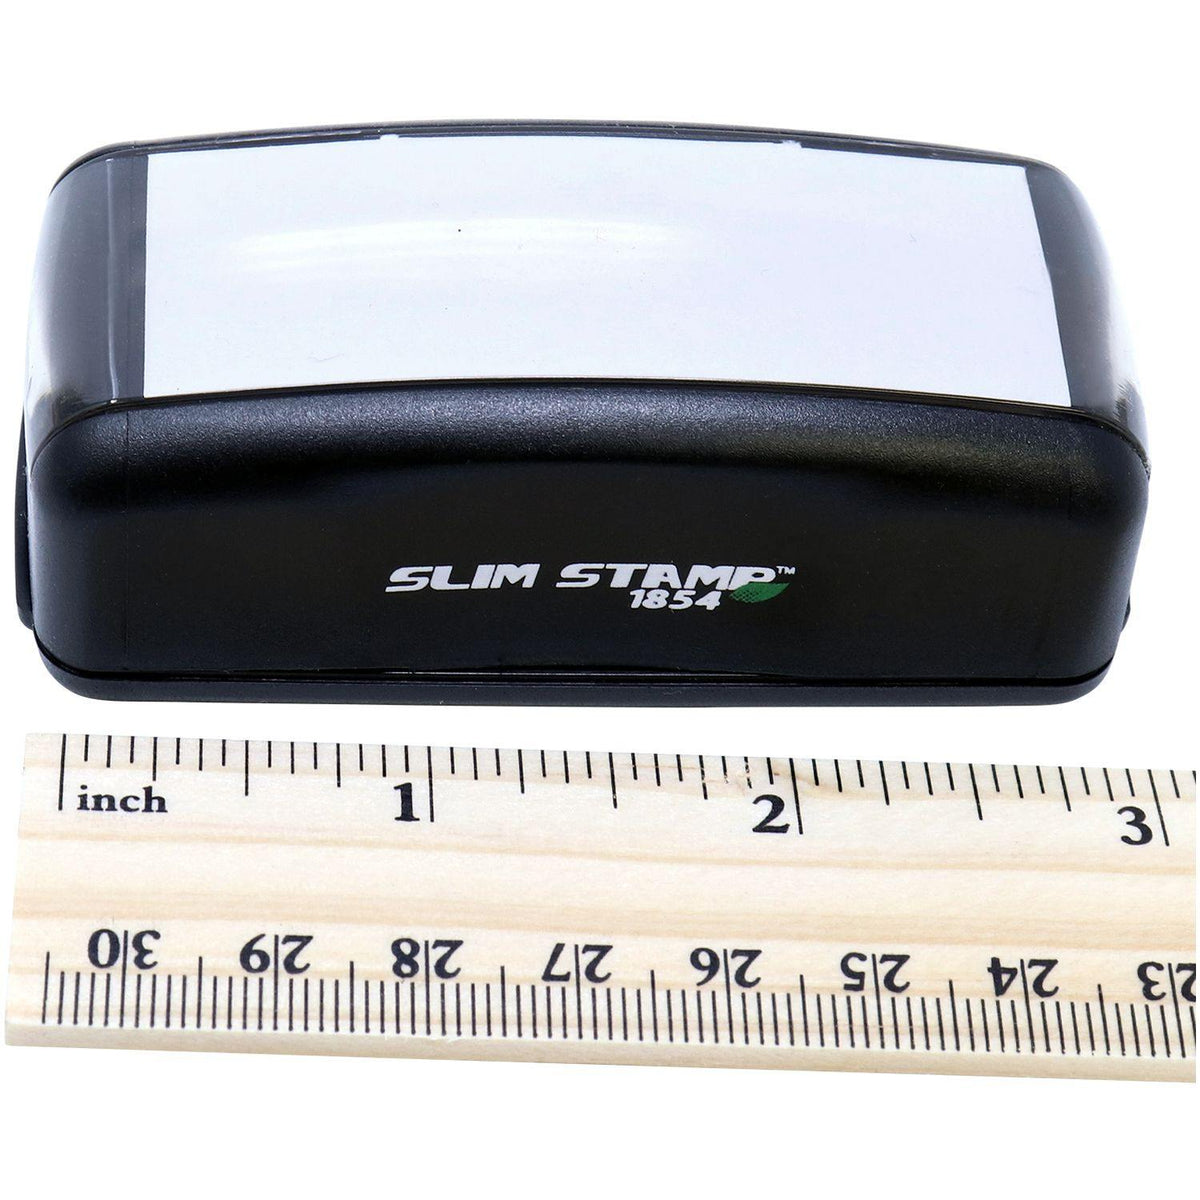 Measurement Large Pre-Inked First Class Mail International Stamp with Ruler